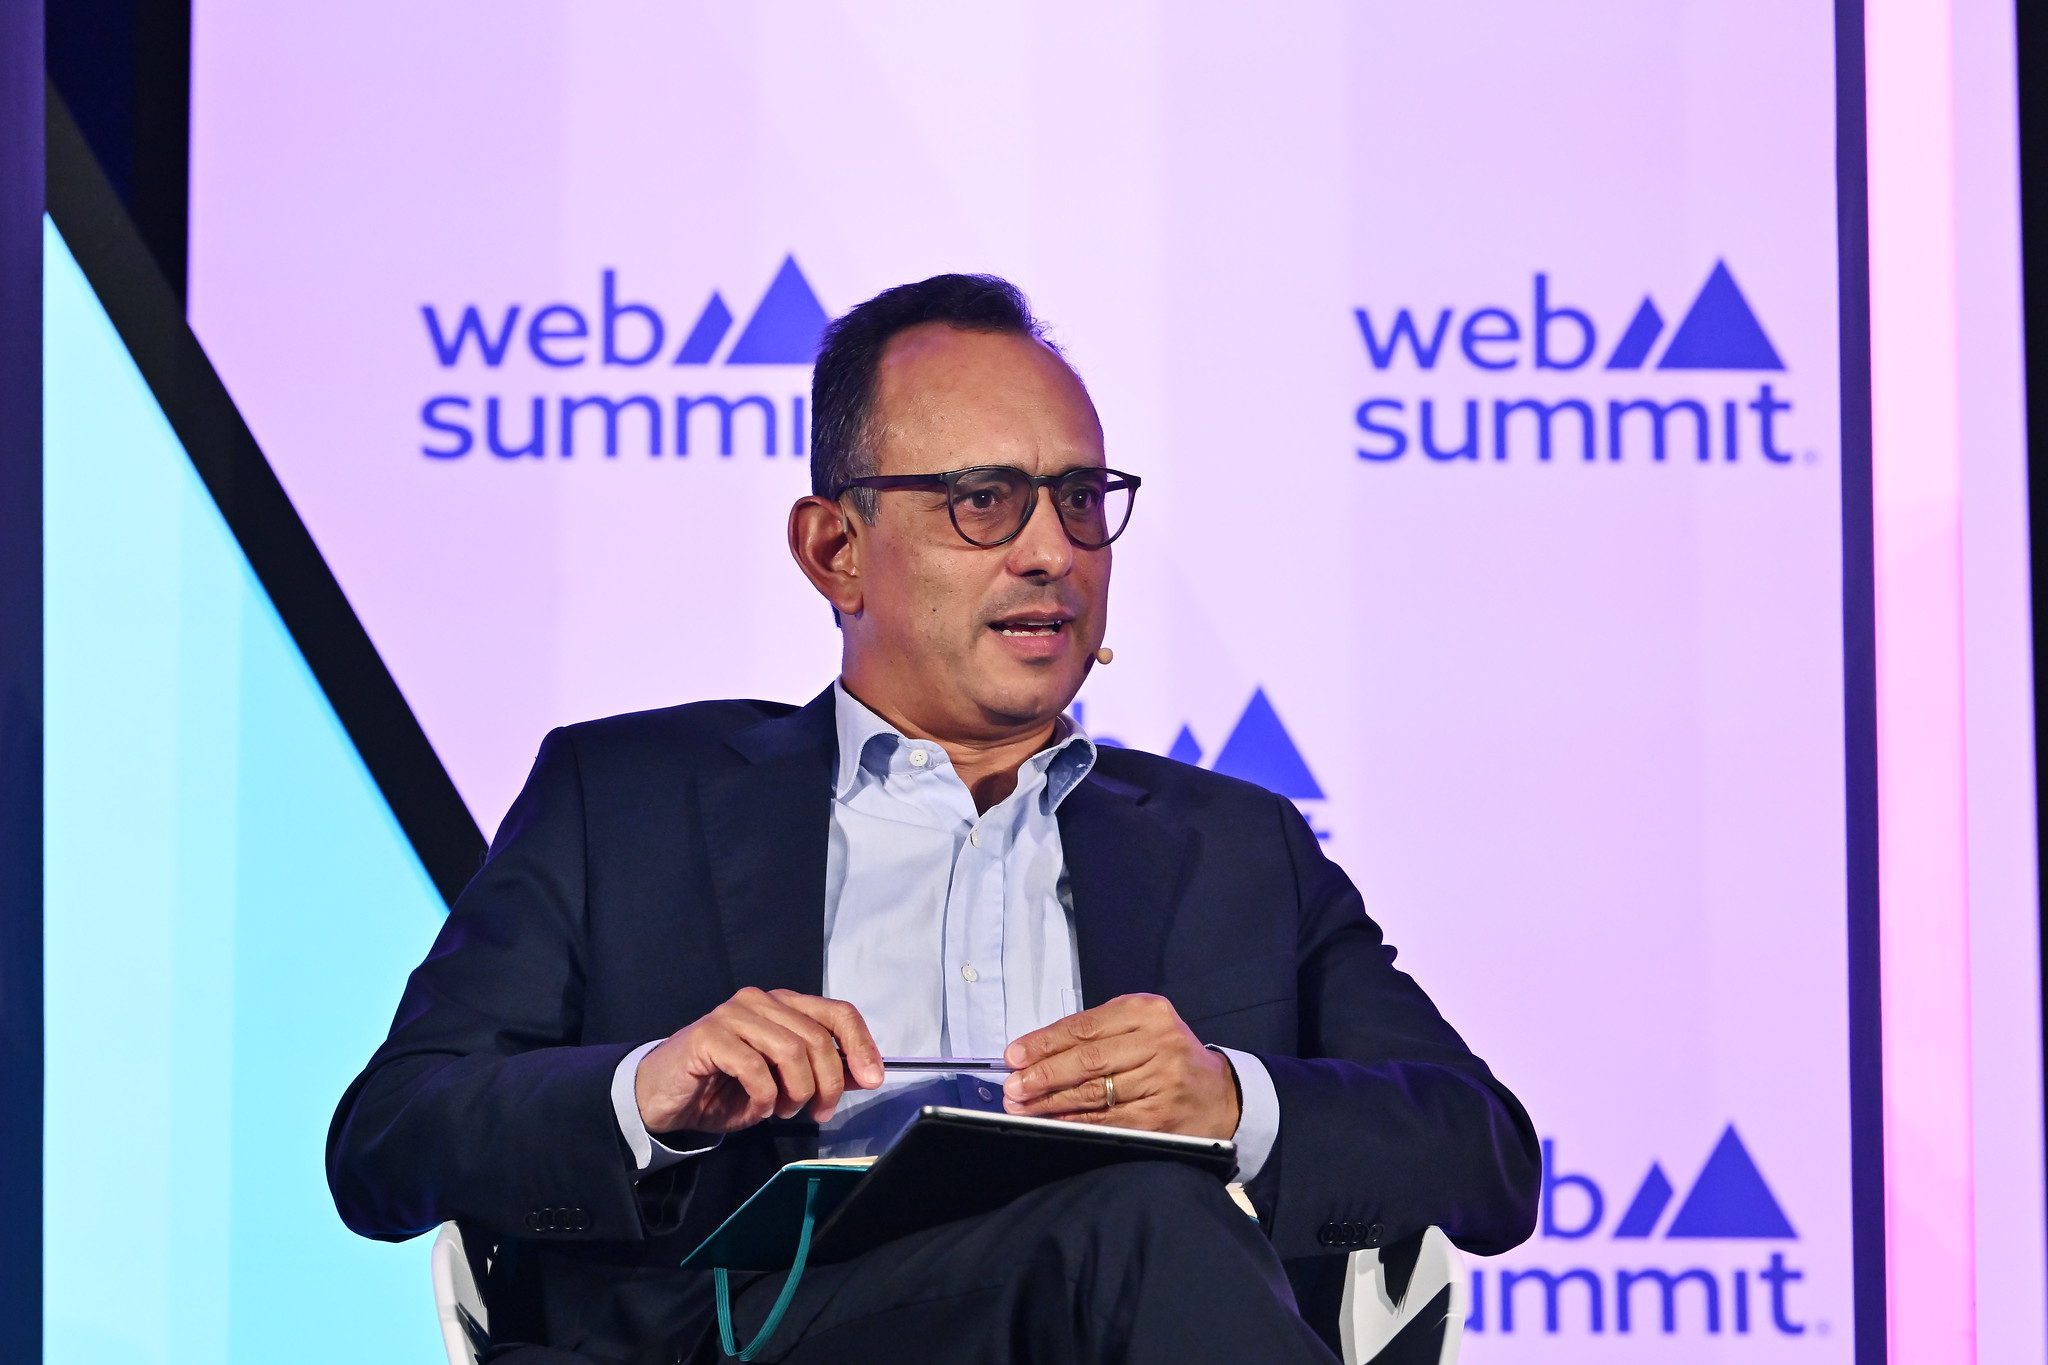 Ricardo Costa, Editor-in-chief, Sociedade Independente de Comunicação (SIC), on Fourth Estate Stage during day one of Web Summit 2023 at the Altice Arena in Lisbon, Portugal